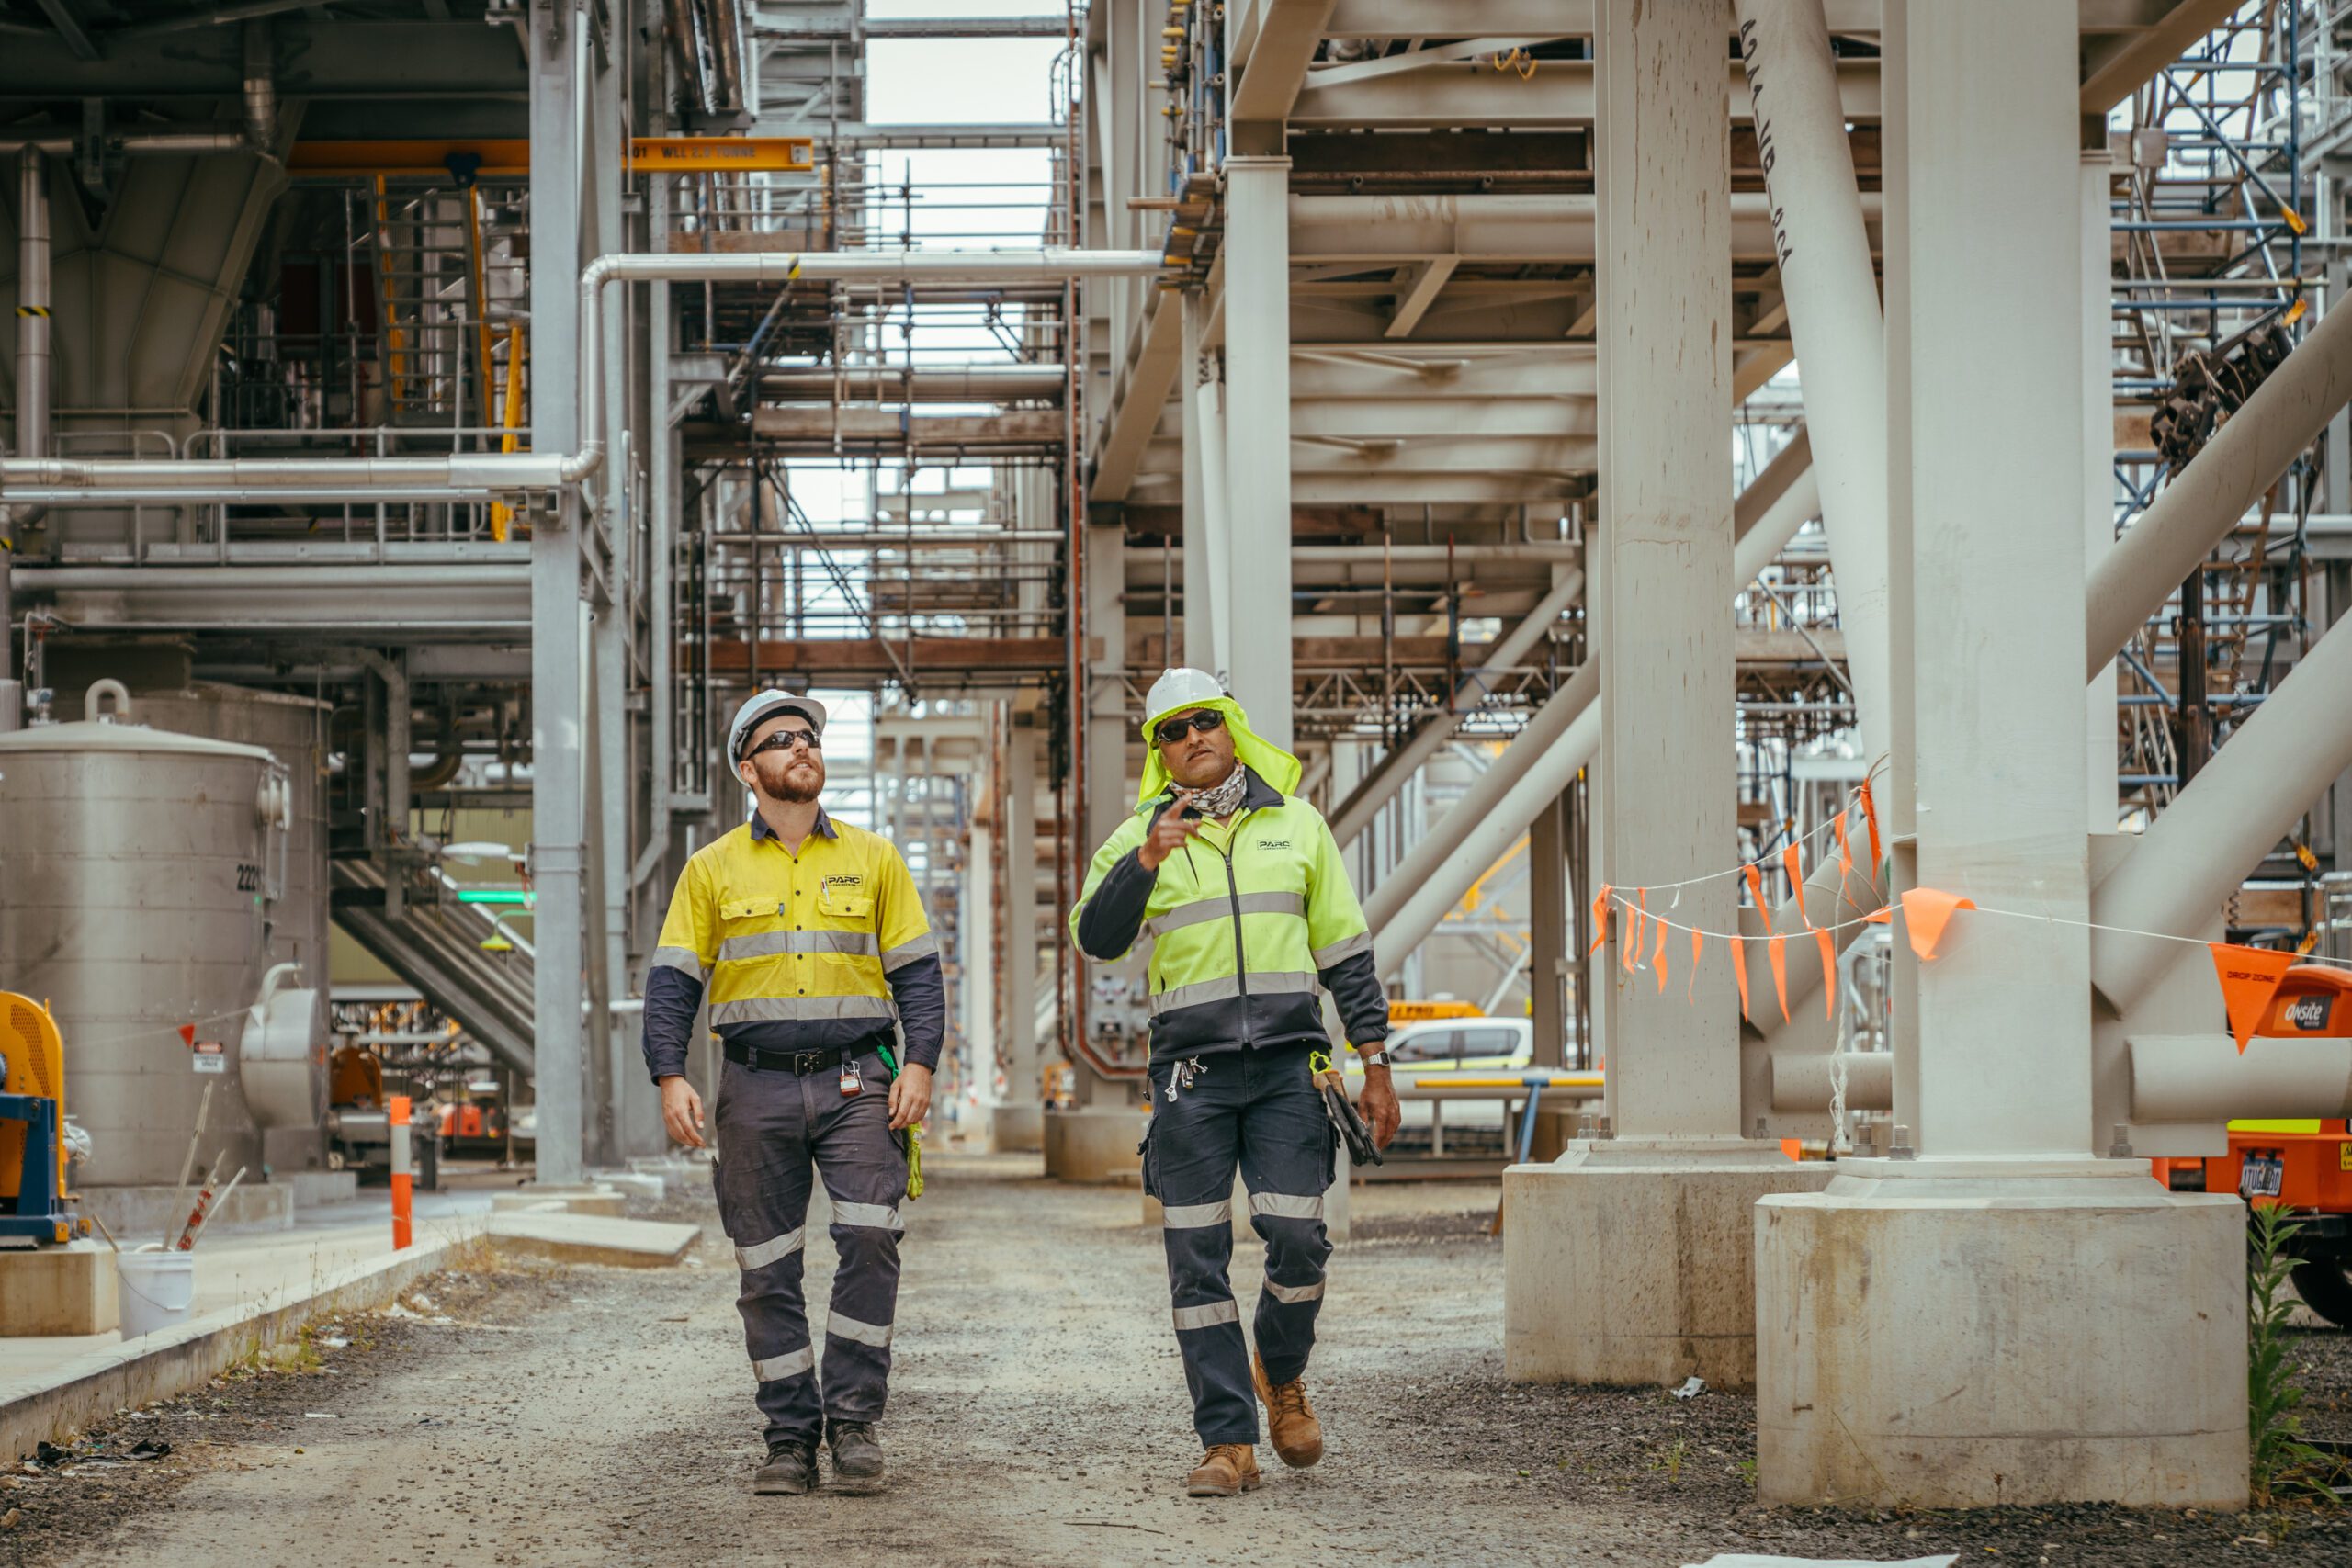 PARC tradies doing infrastructure inspection